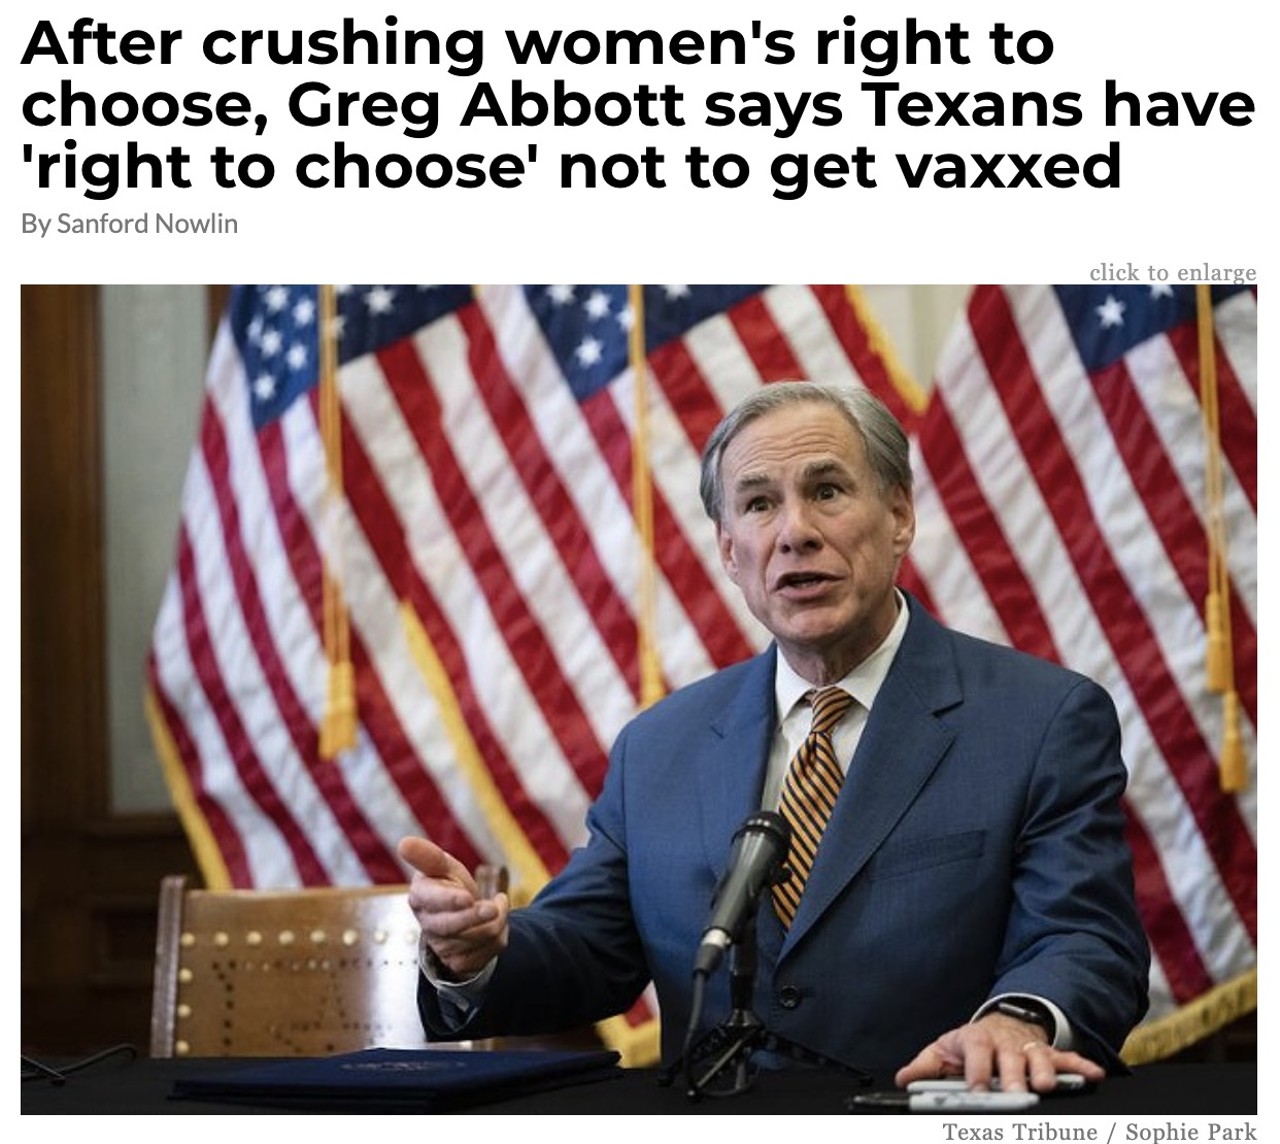 12. After crushing women's right to choose, Greg Abbott says Texans have 'right to choose' not to get vaxxed 